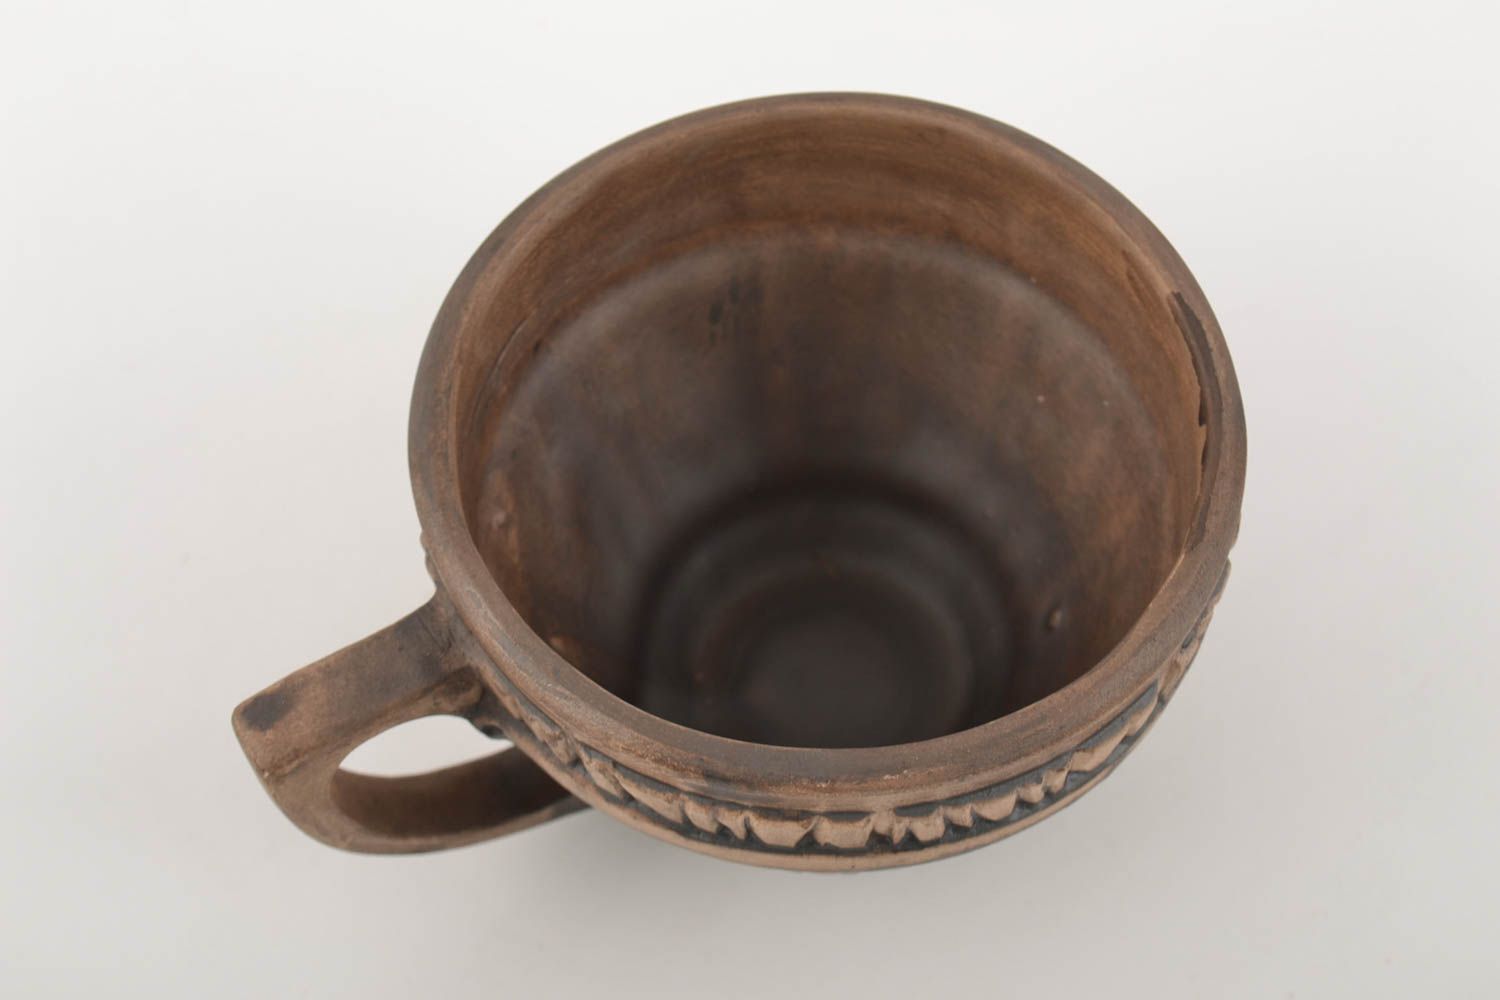 11 oz clay coffee cup with fake wooden pattern and handle 0,51 lb photo 2